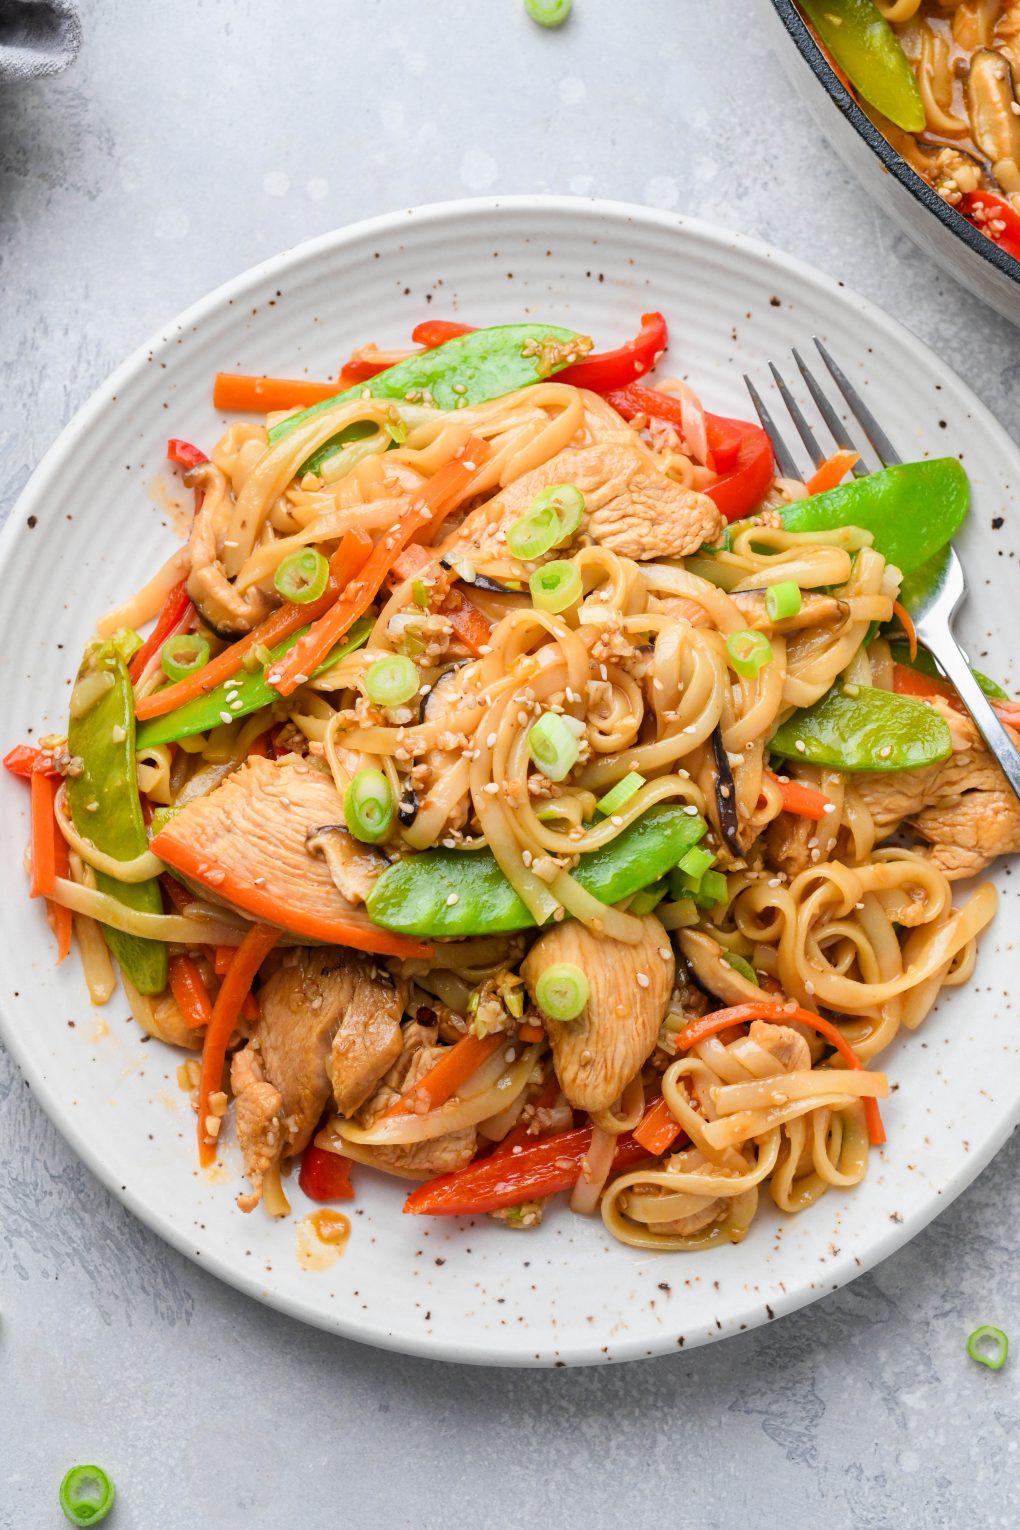 Loaded Rice Noodle Stir Fry with Crispy Garlic - Like Healthier Take Out!